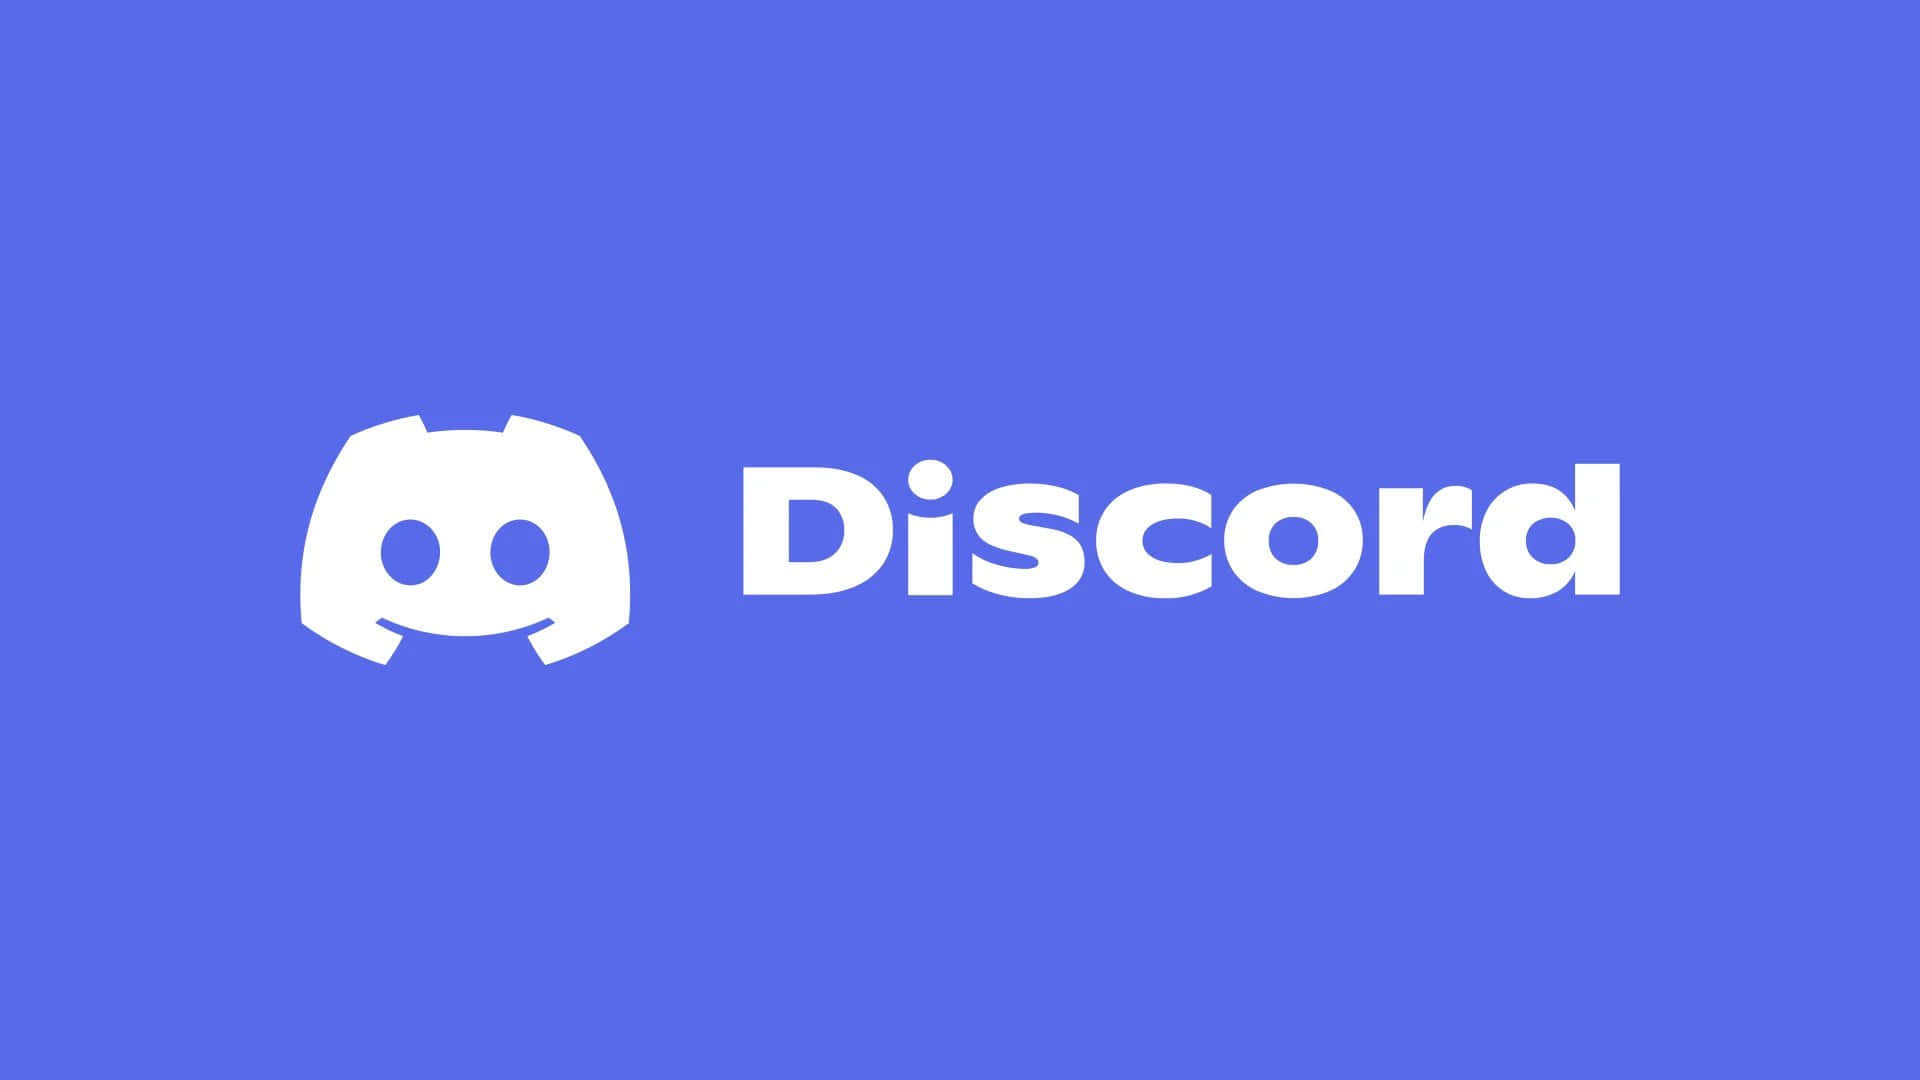 Double your fun with Discord